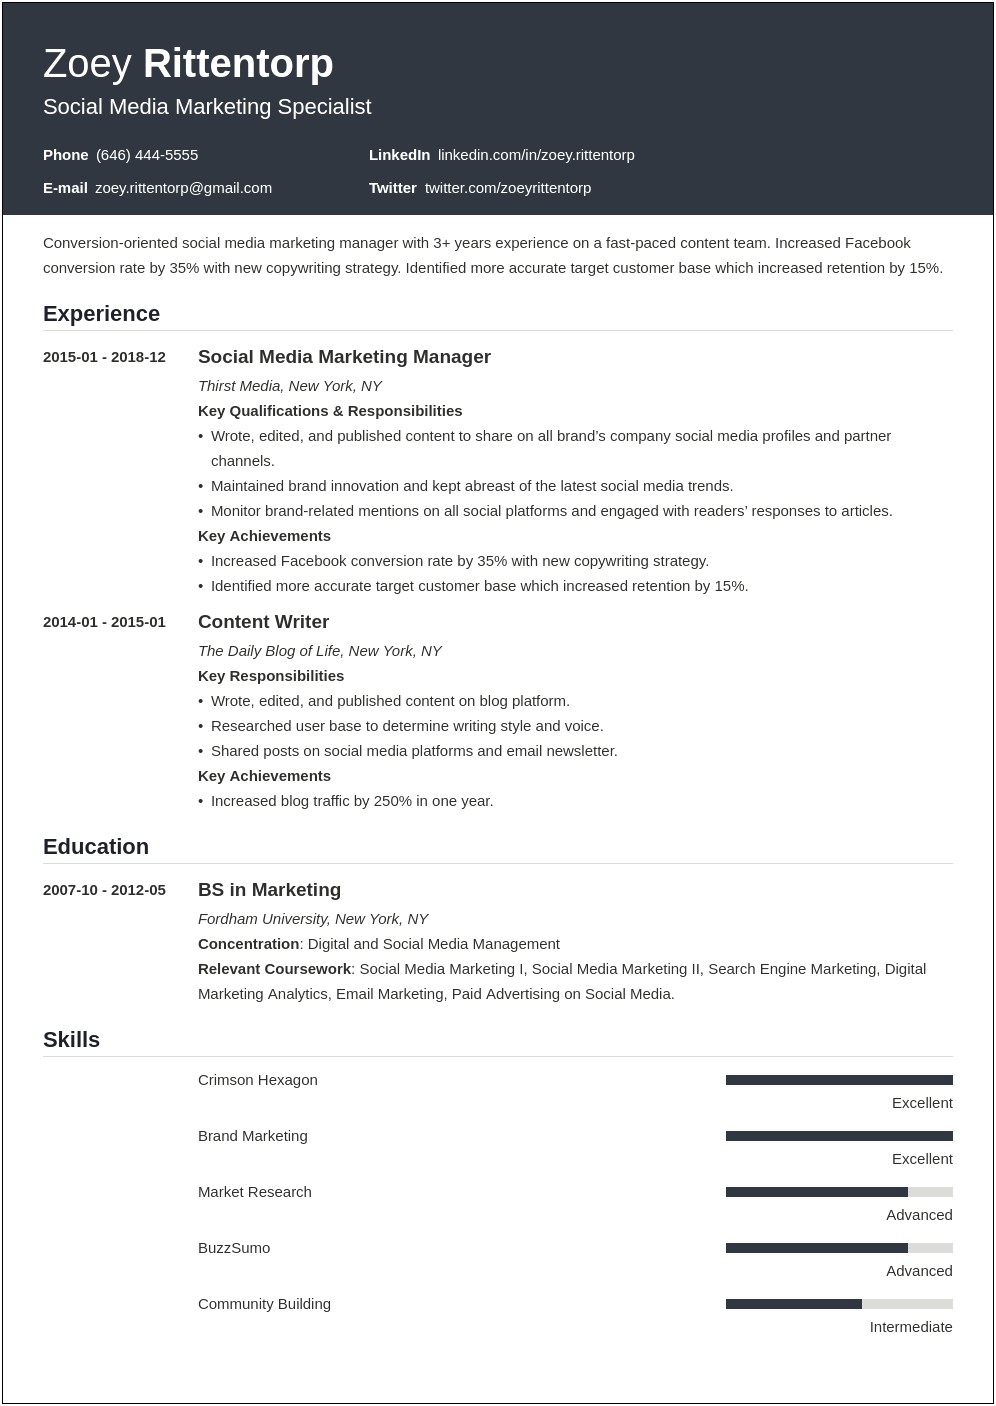 Resume Wording For Creating And Writting Newsletters